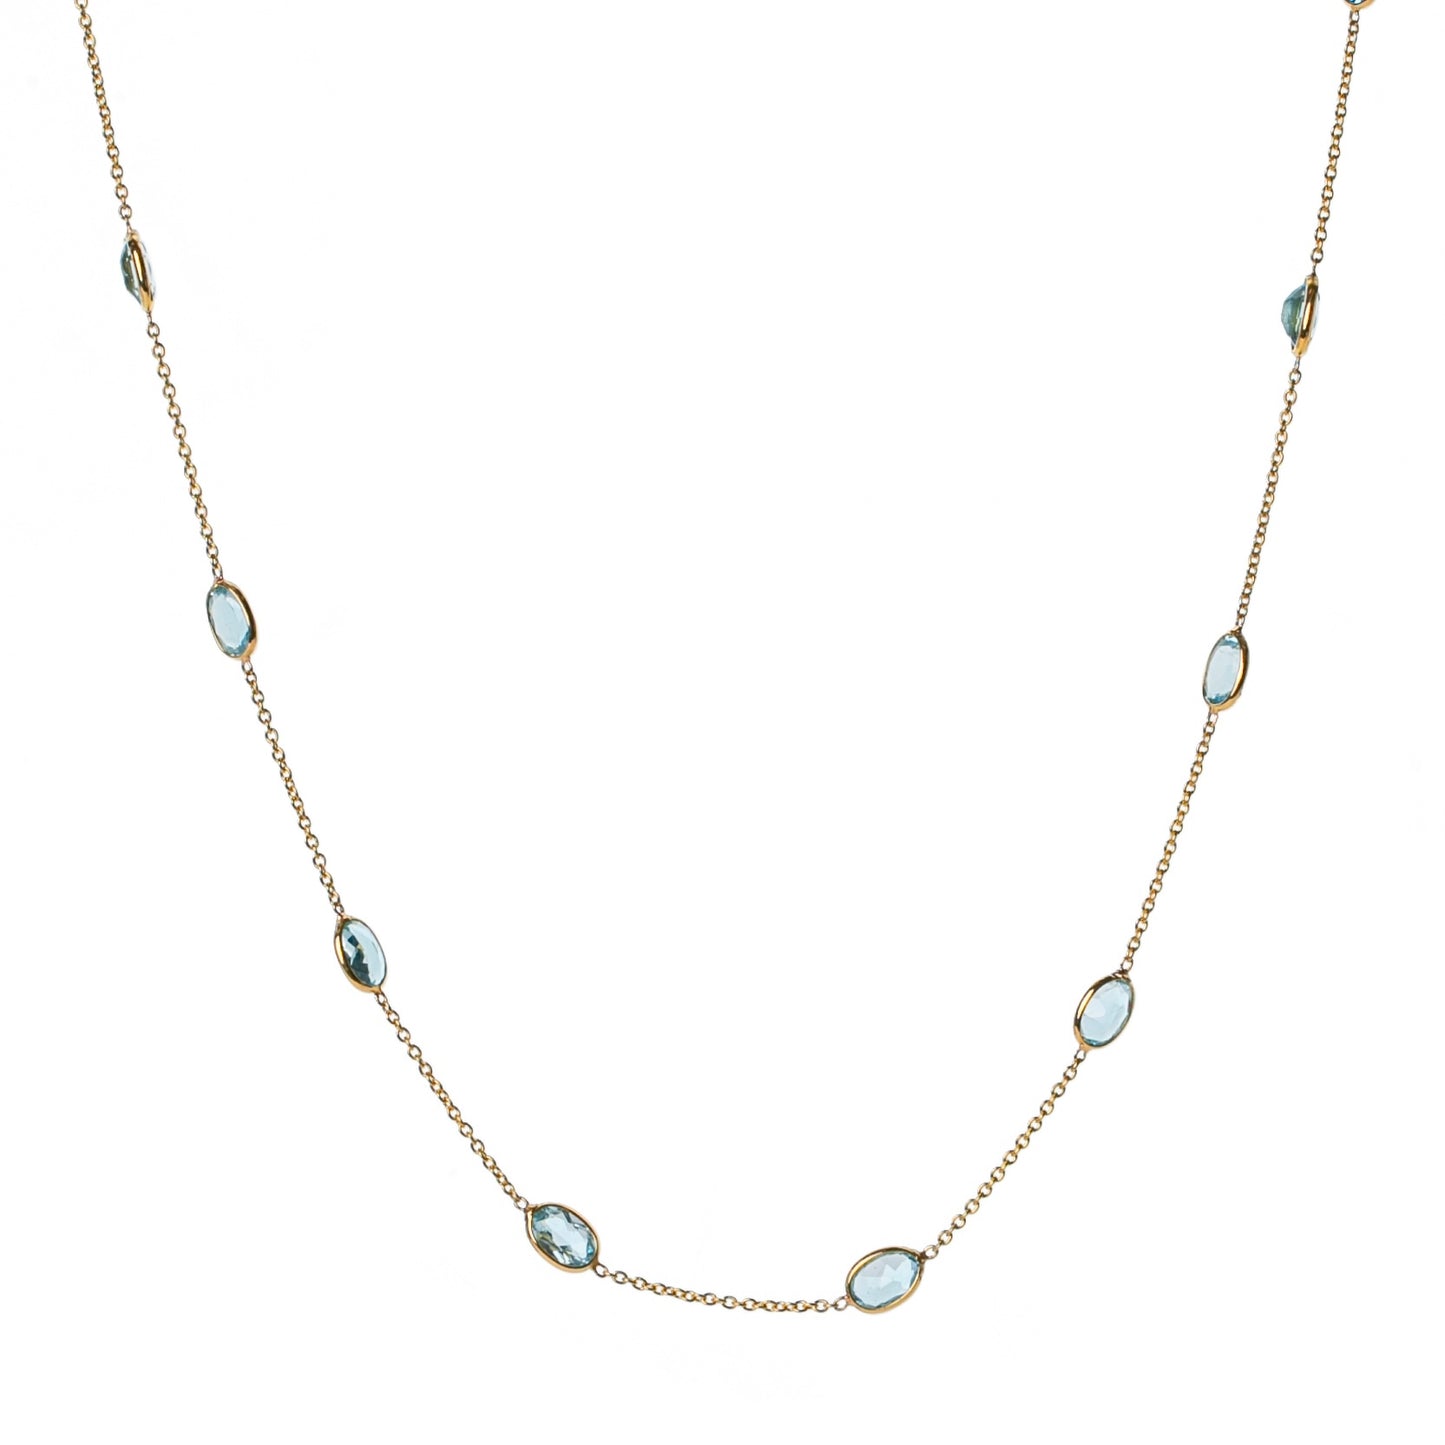 Turquoise bead necklace with aquamarine cabochon by Julia Lloyd George